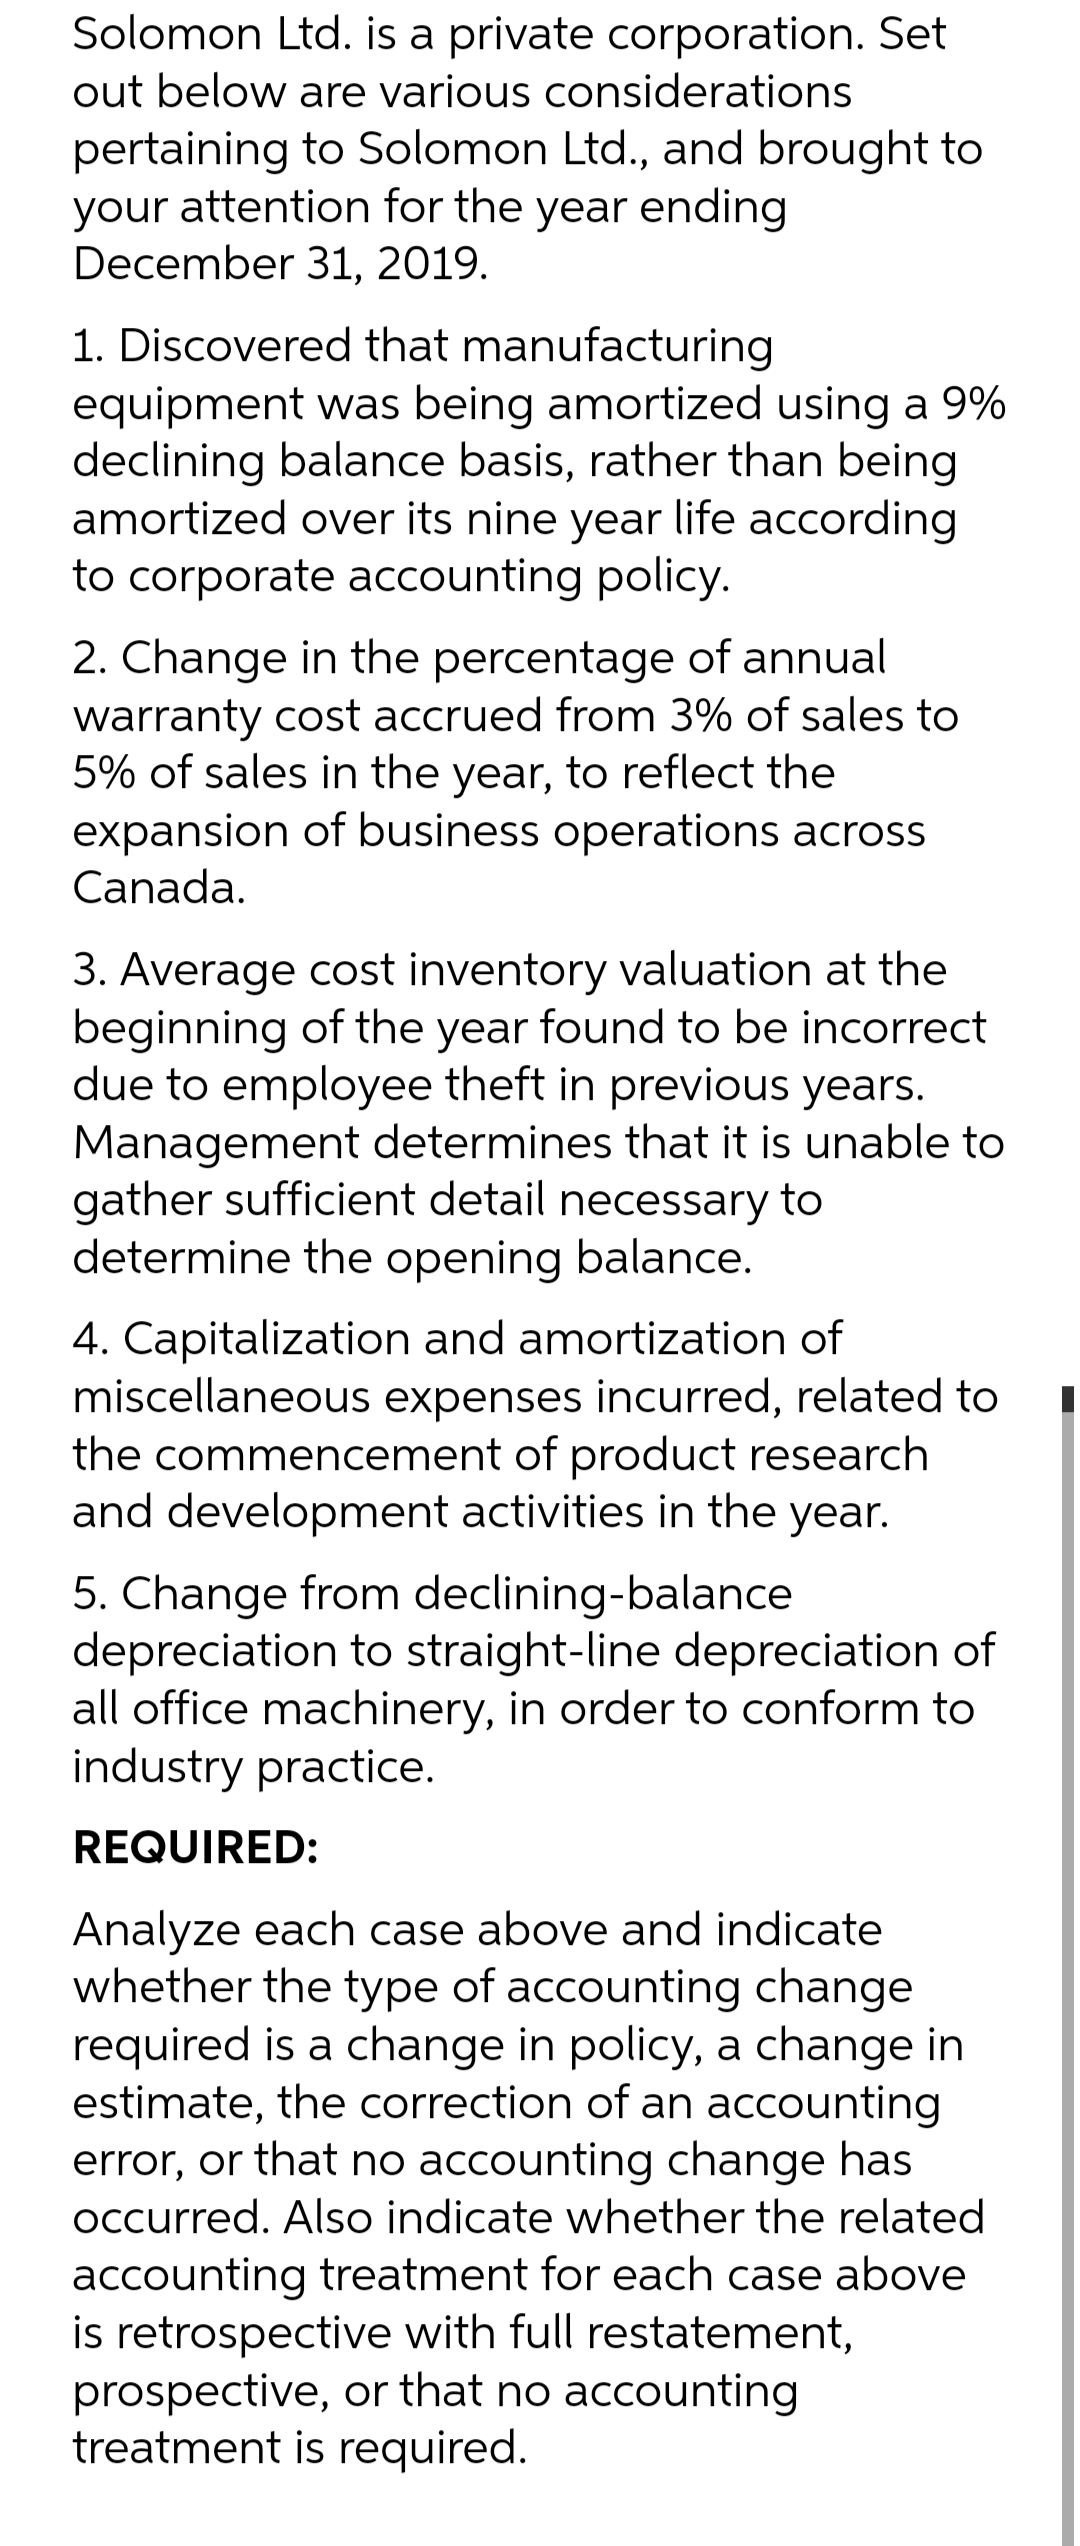 Solomon Ltd. is a private corporation. Set
out below are various considerations
pertaining to Solomon Ltd., and brought to
your attention for the year ending
December 31, 2019.
1. Discovered that manufacturing
equipment was being amortized using a 9%
declining balance basis, rather than being
amortized over its nine year life according
to corporate accounting policy.
2. Change in the percentage of annual
warranty cost accrued from 3% of sales to
5% of sales in the year, to reflect the
expansion of business operations across
Canada.
3. Average cost inventory valuation at the
beginning of the year found to be incorrect
due to employee theft in previous years.
Management determines that it is unable to
gather sufficient detail necessary to
determine the opening balance.
4. Capitalization and amortization of
miscellaneous expenses incurred, related to
the commencement of product research
and development activities in the year.
5. Change from declining-balance
depreciation to straight-line depreciation of
all office machinery, in order to conform to
industry practice.
REQUIRED:
Analyze each case above and indicate
whether the type of accounting change
required is a change in policy, a change in
estimate, the correction of an accounting
error, or that no accounting change has
occurred. Also indicate whether the related
accounting treatment for each case above
is retrospective with full restatement,
prospective, or that no accounting
treatment is required.